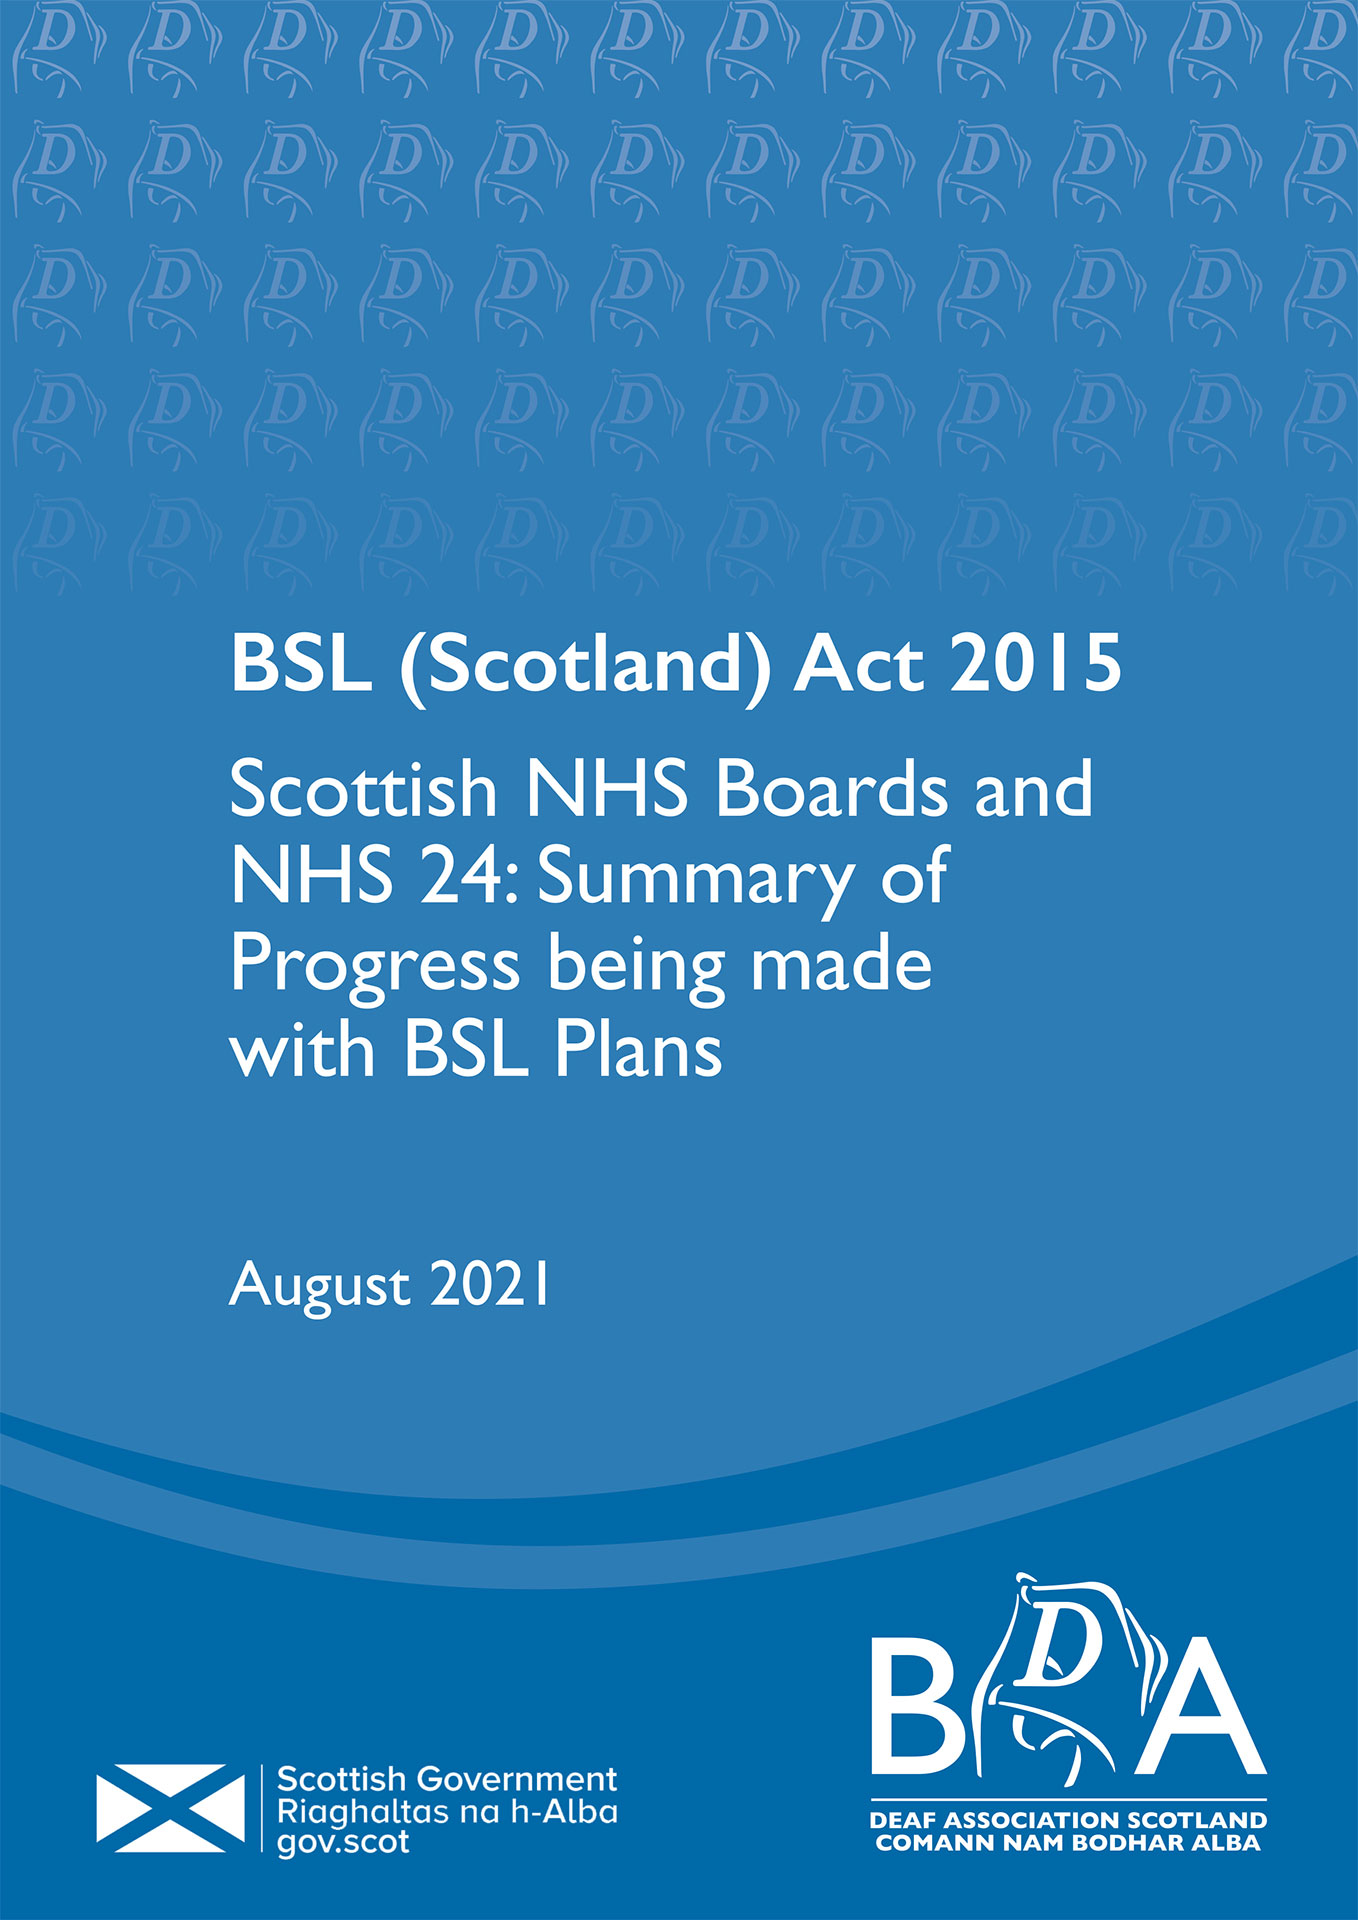 Final-NHS-Summary-of-Progress-being-made-with-BSL-Plans-Report-2021-1